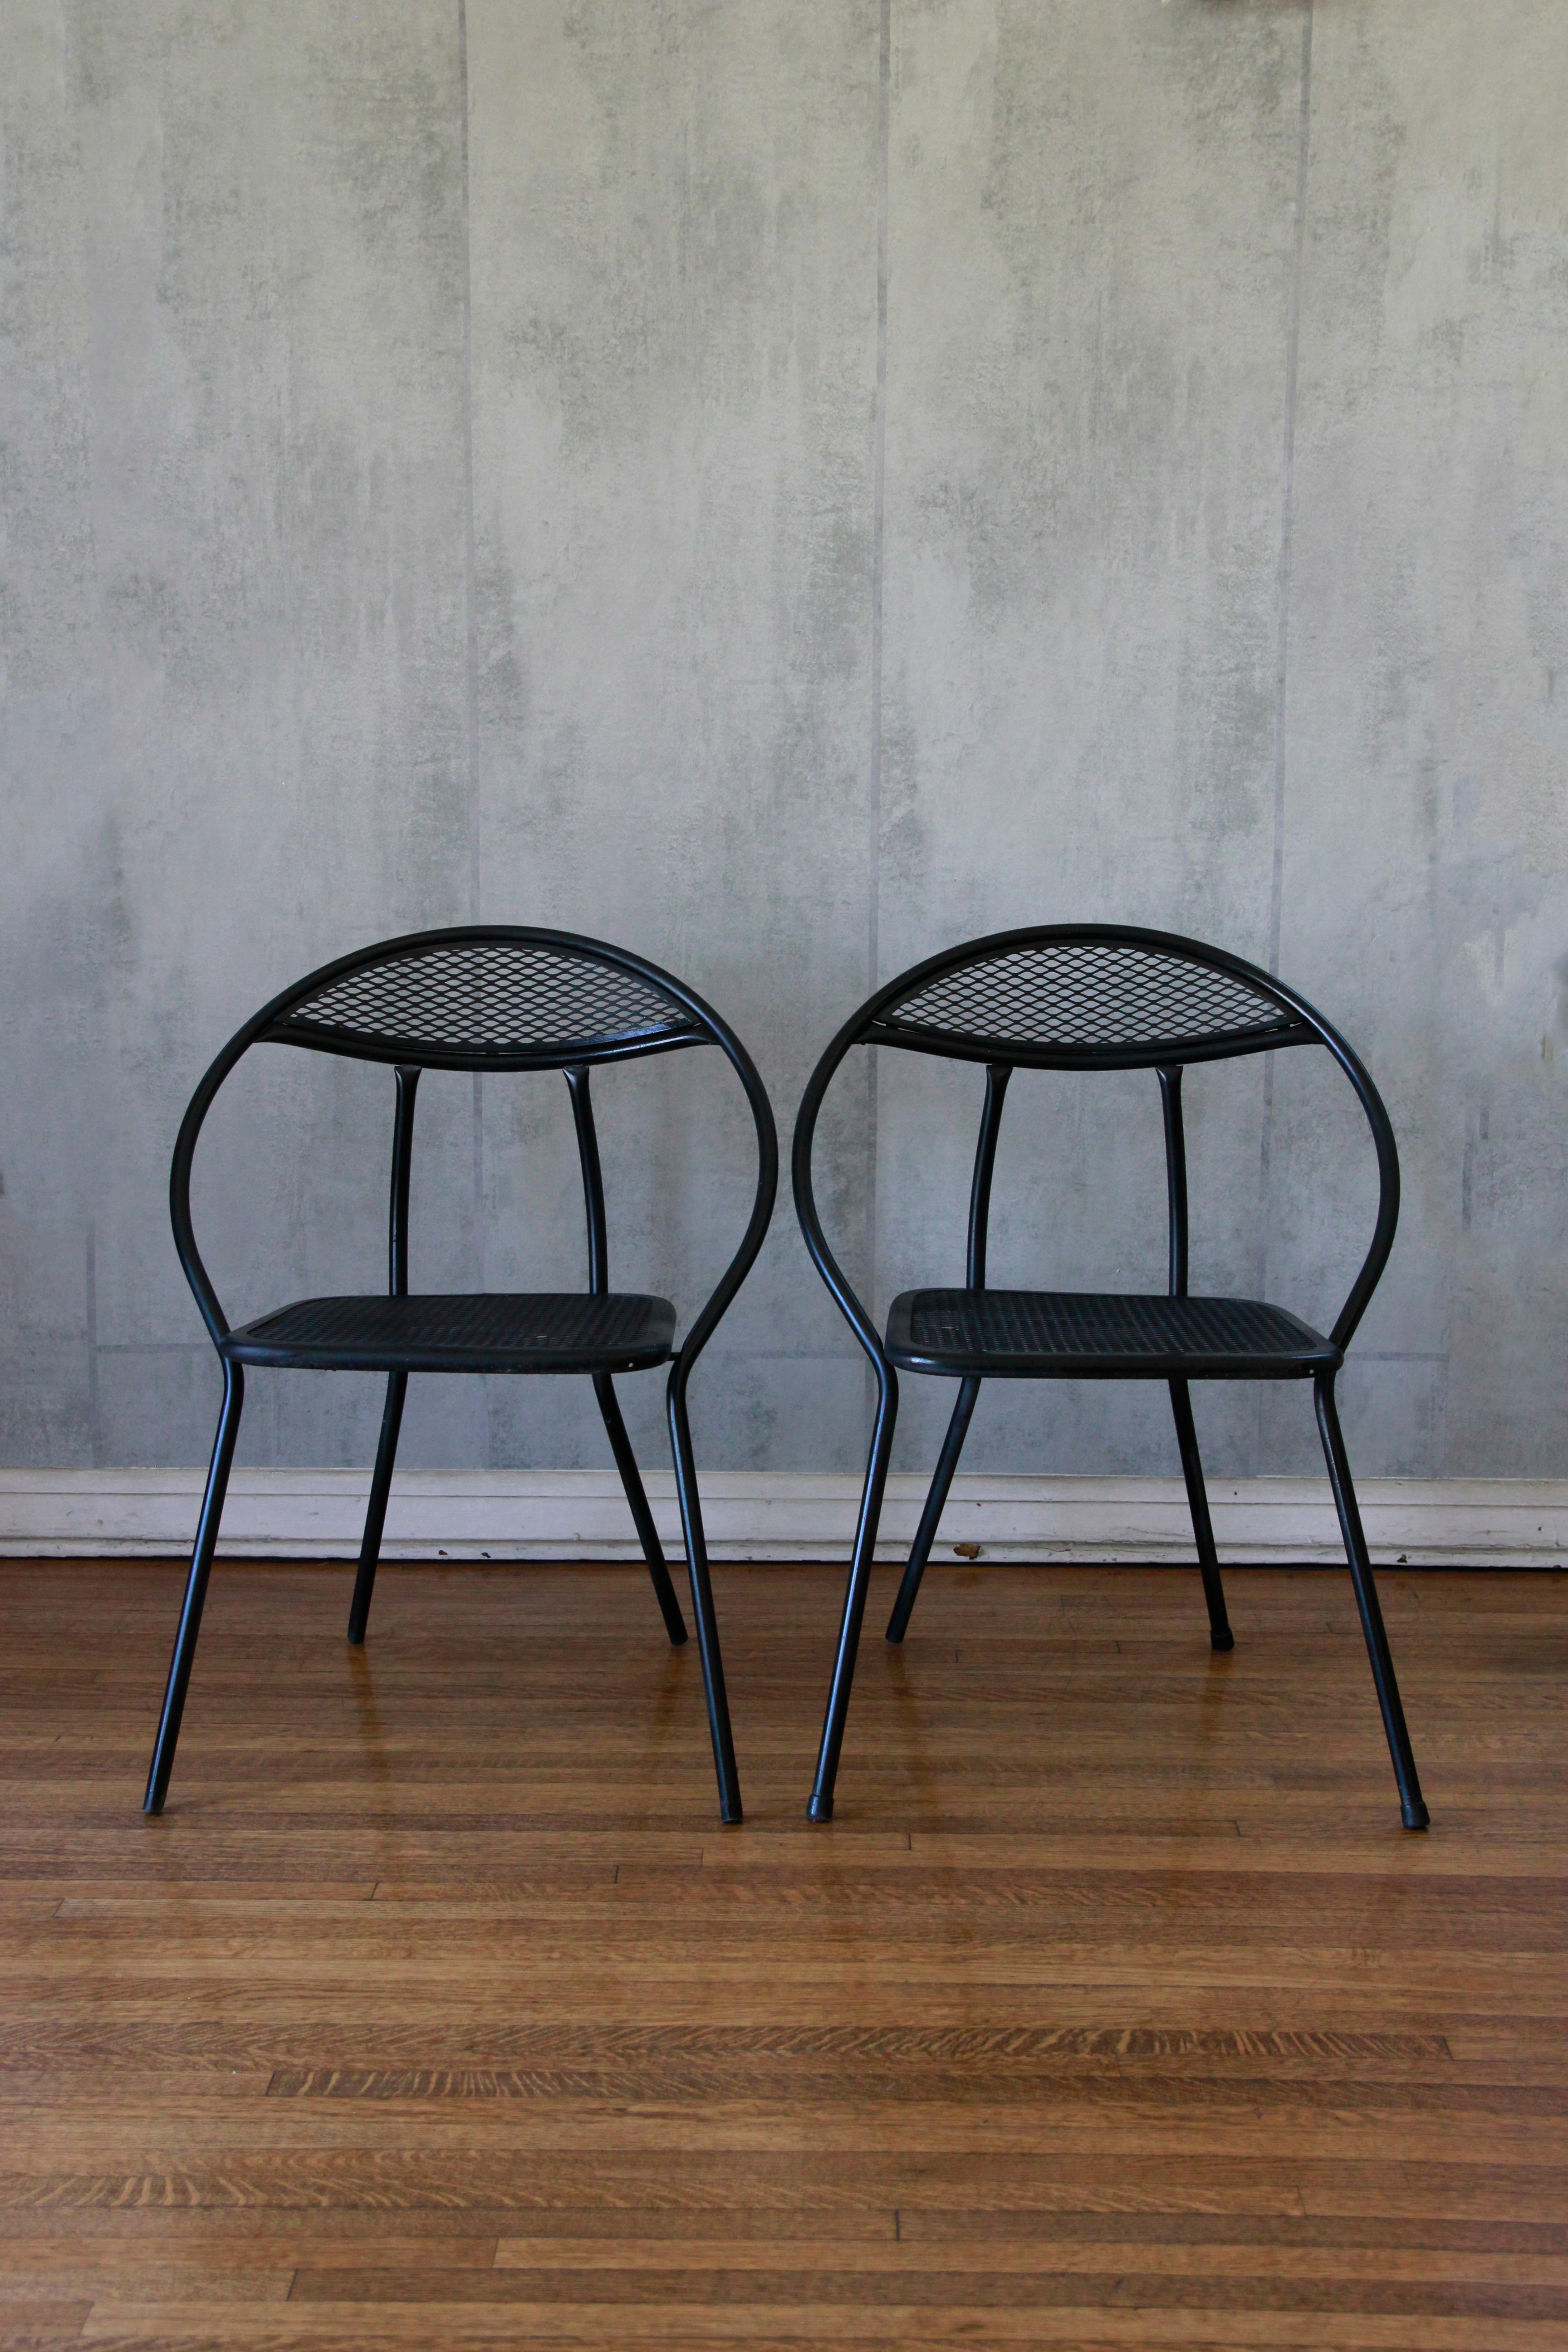 Mid-Century Modern outdoor patio pair of folding chairs designed by Salterini.
The chairs are made of mesh and tubular steel. In good vintage condition. 
Classic rounded shape, the fold for easy storage.